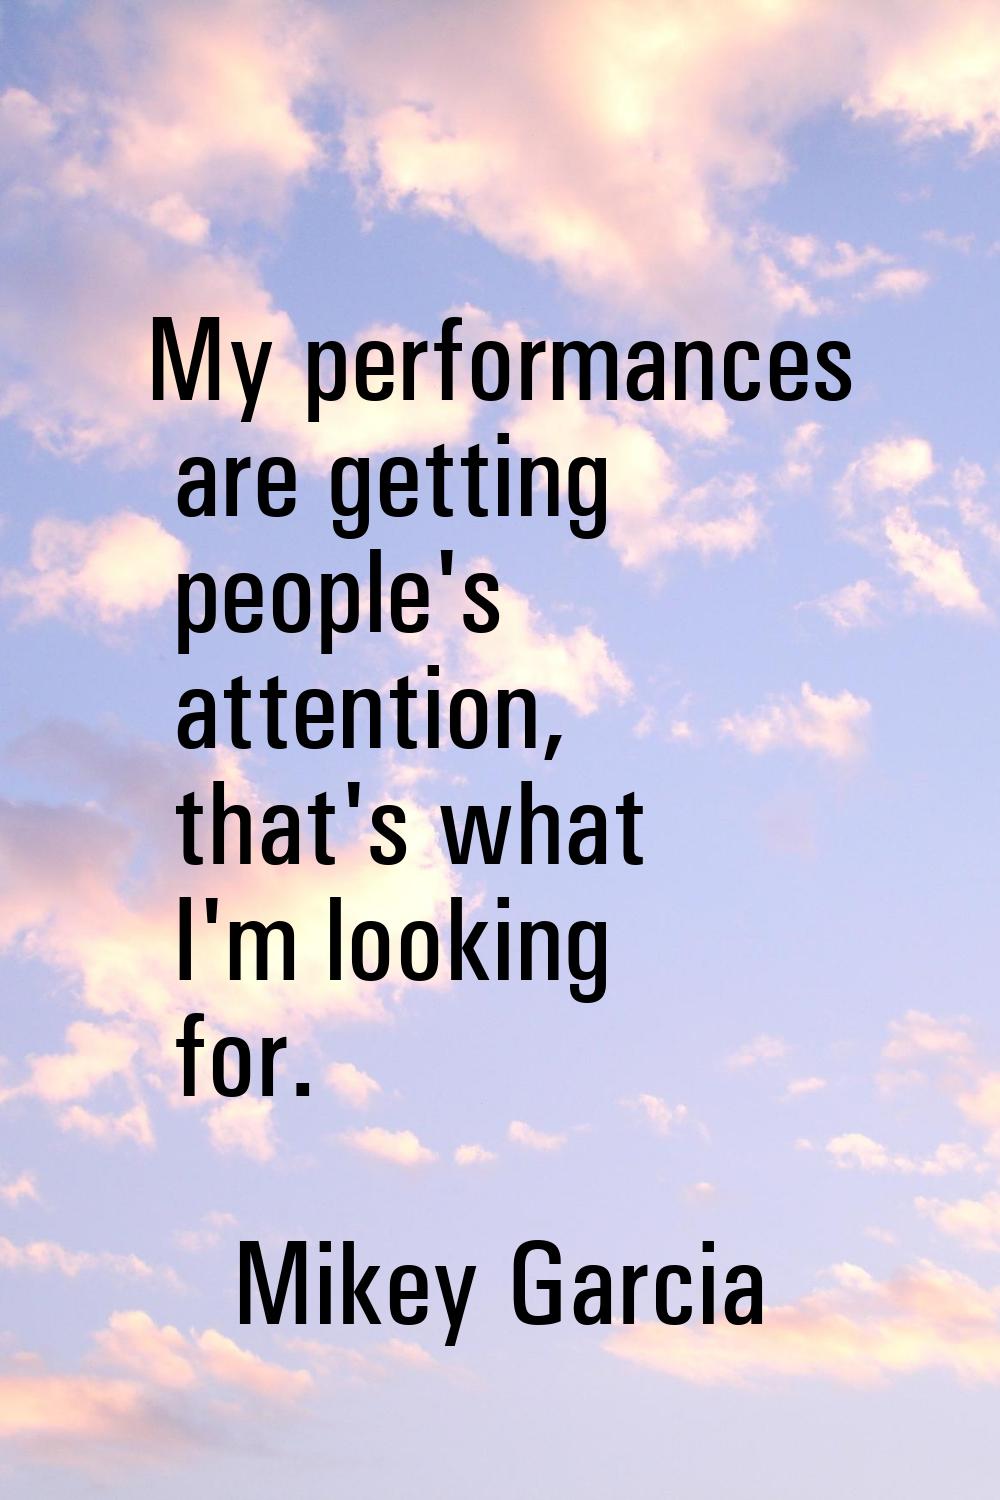 My performances are getting people's attention, that's what I'm looking for.